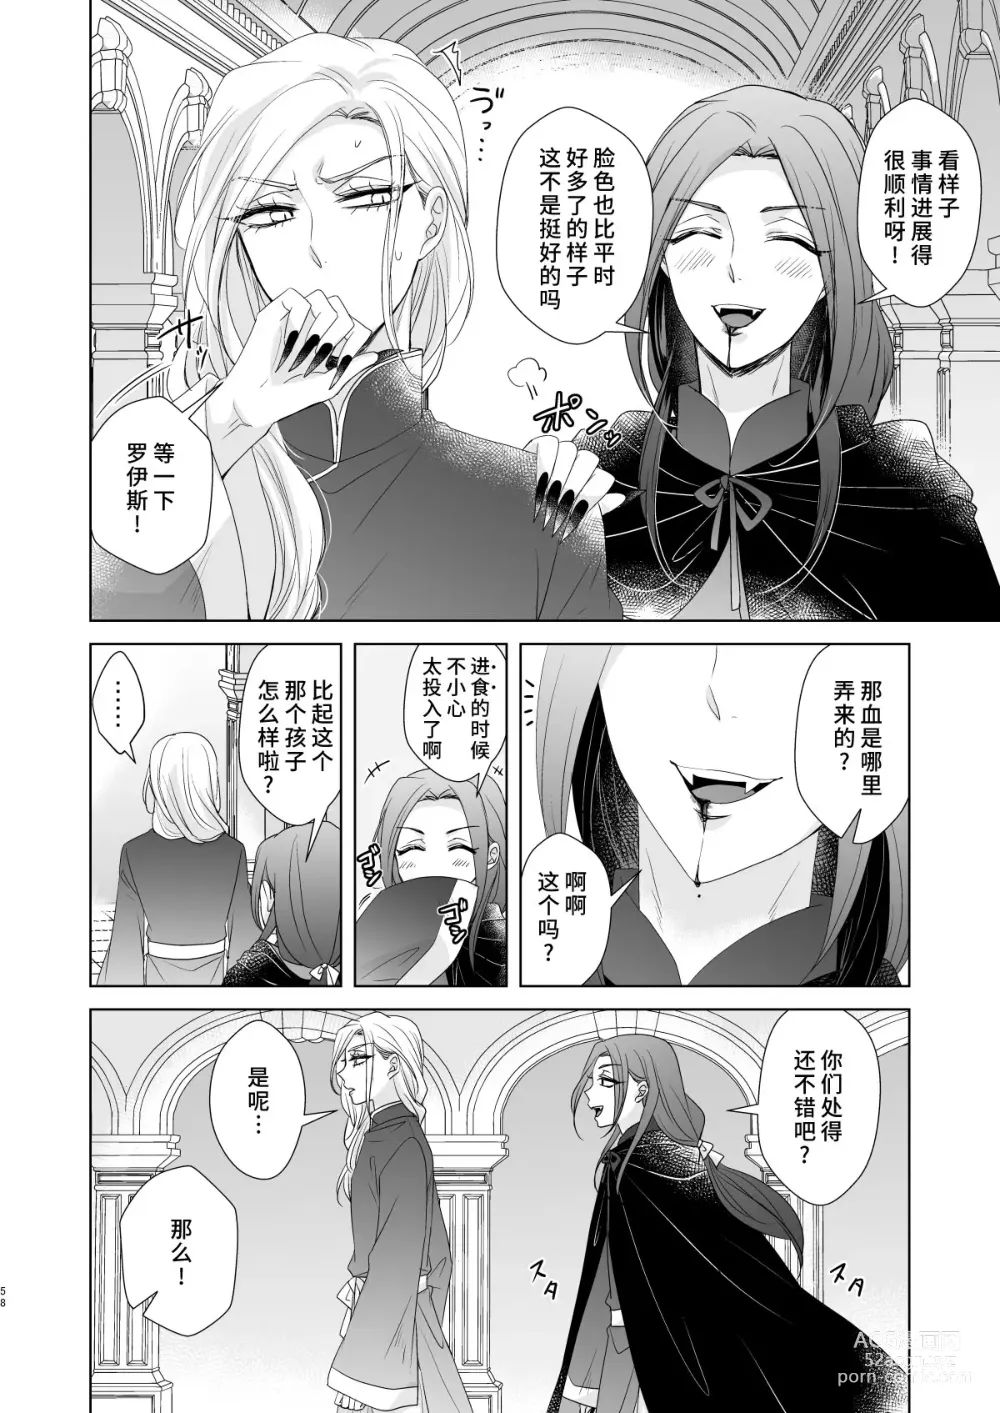 Page 57 of doujinshi 男大姐♂吸血鬼和少女